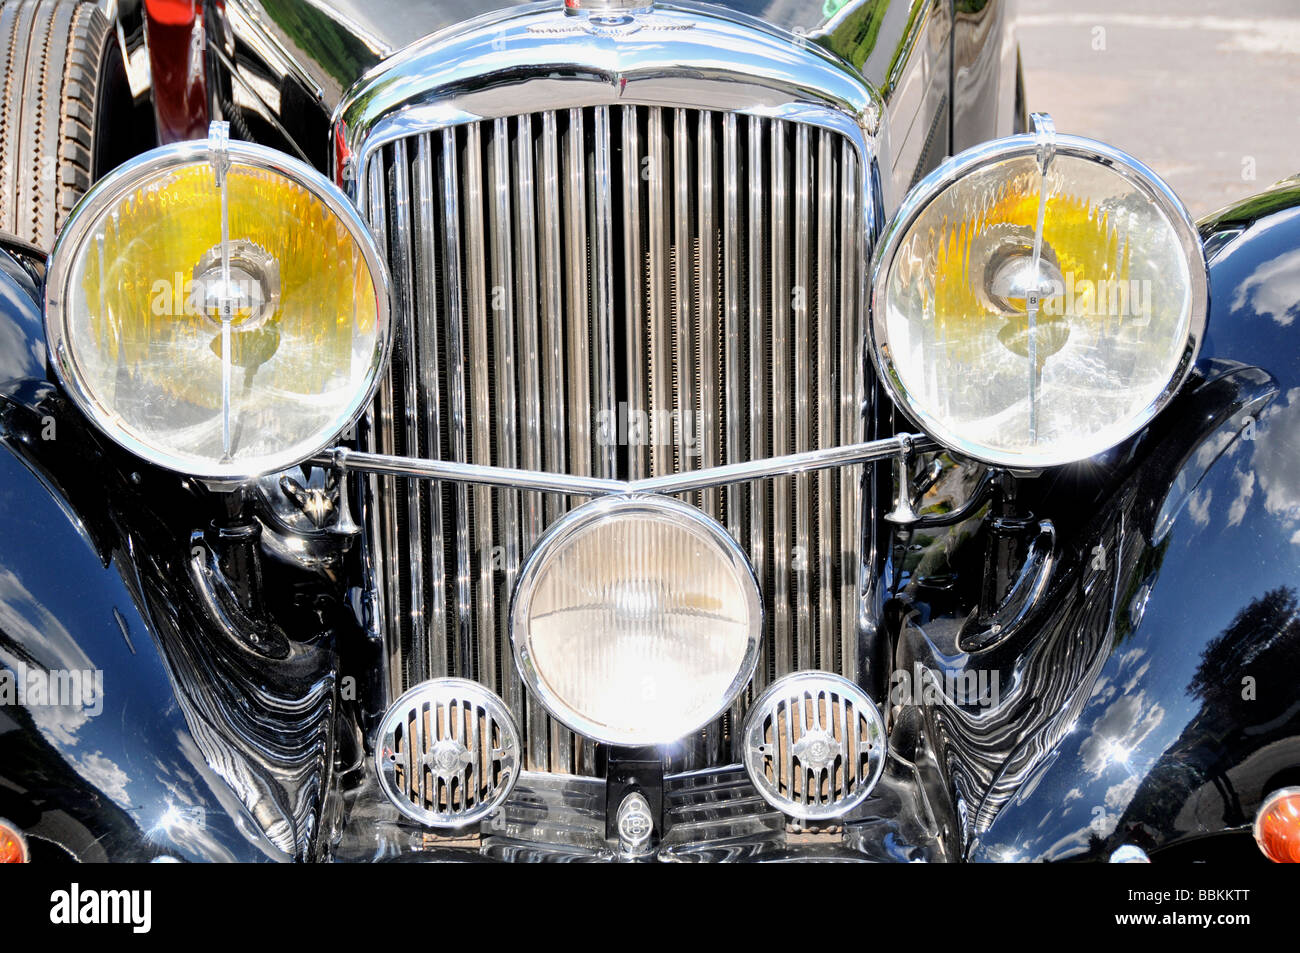 radiator grill and headlights of old Bentley car Stock Photo